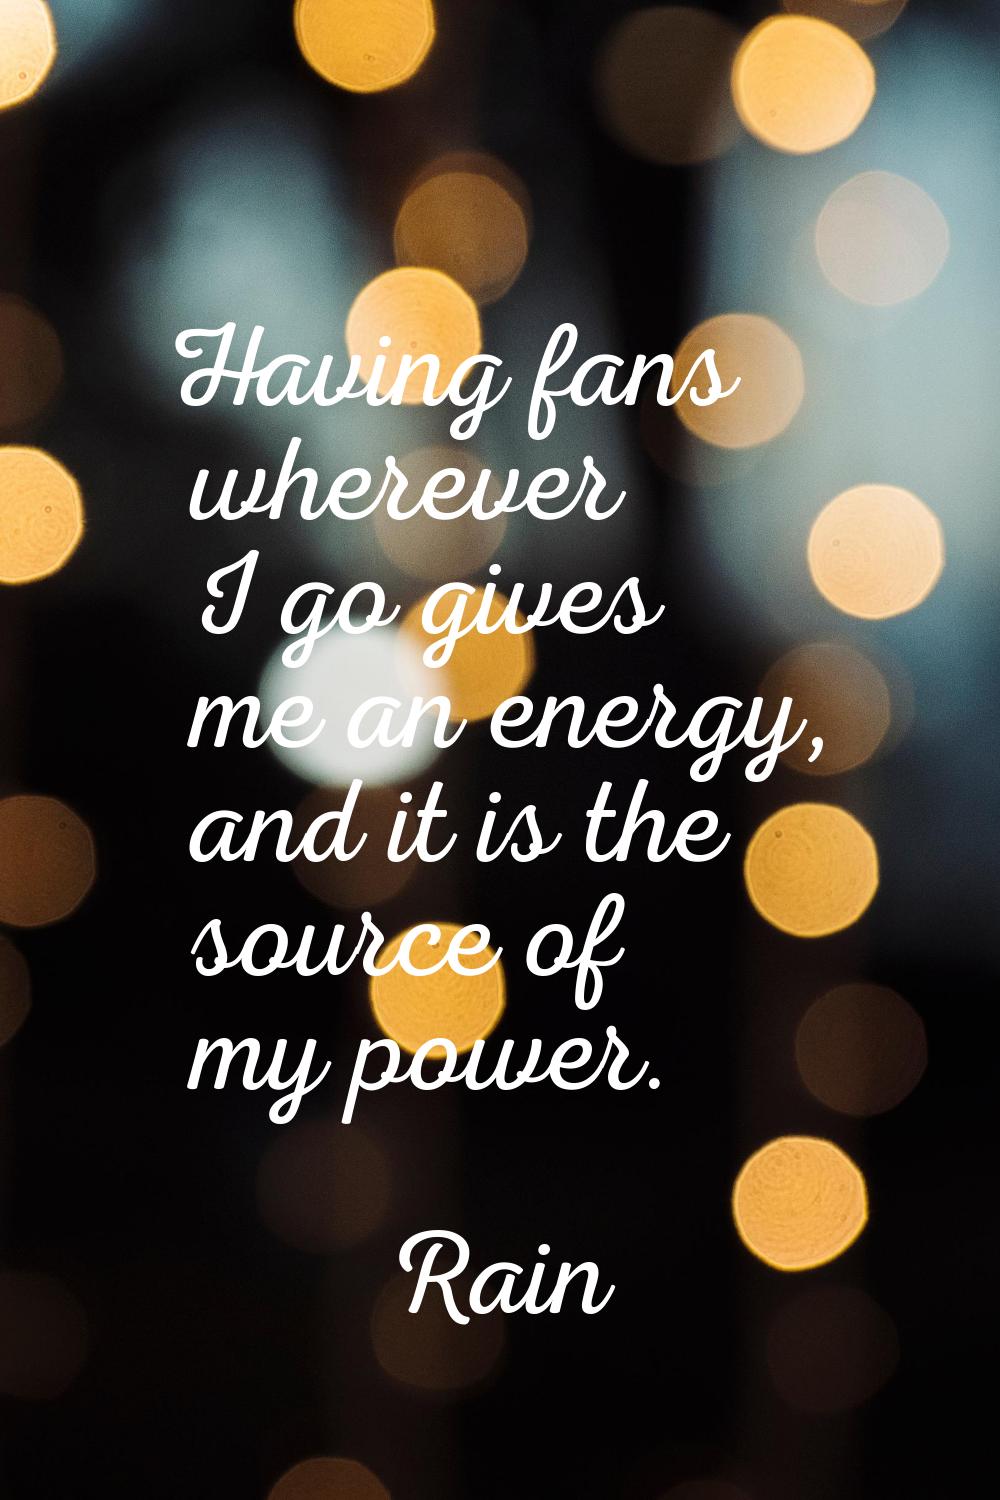 Having fans wherever I go gives me an energy, and it is the source of my power.